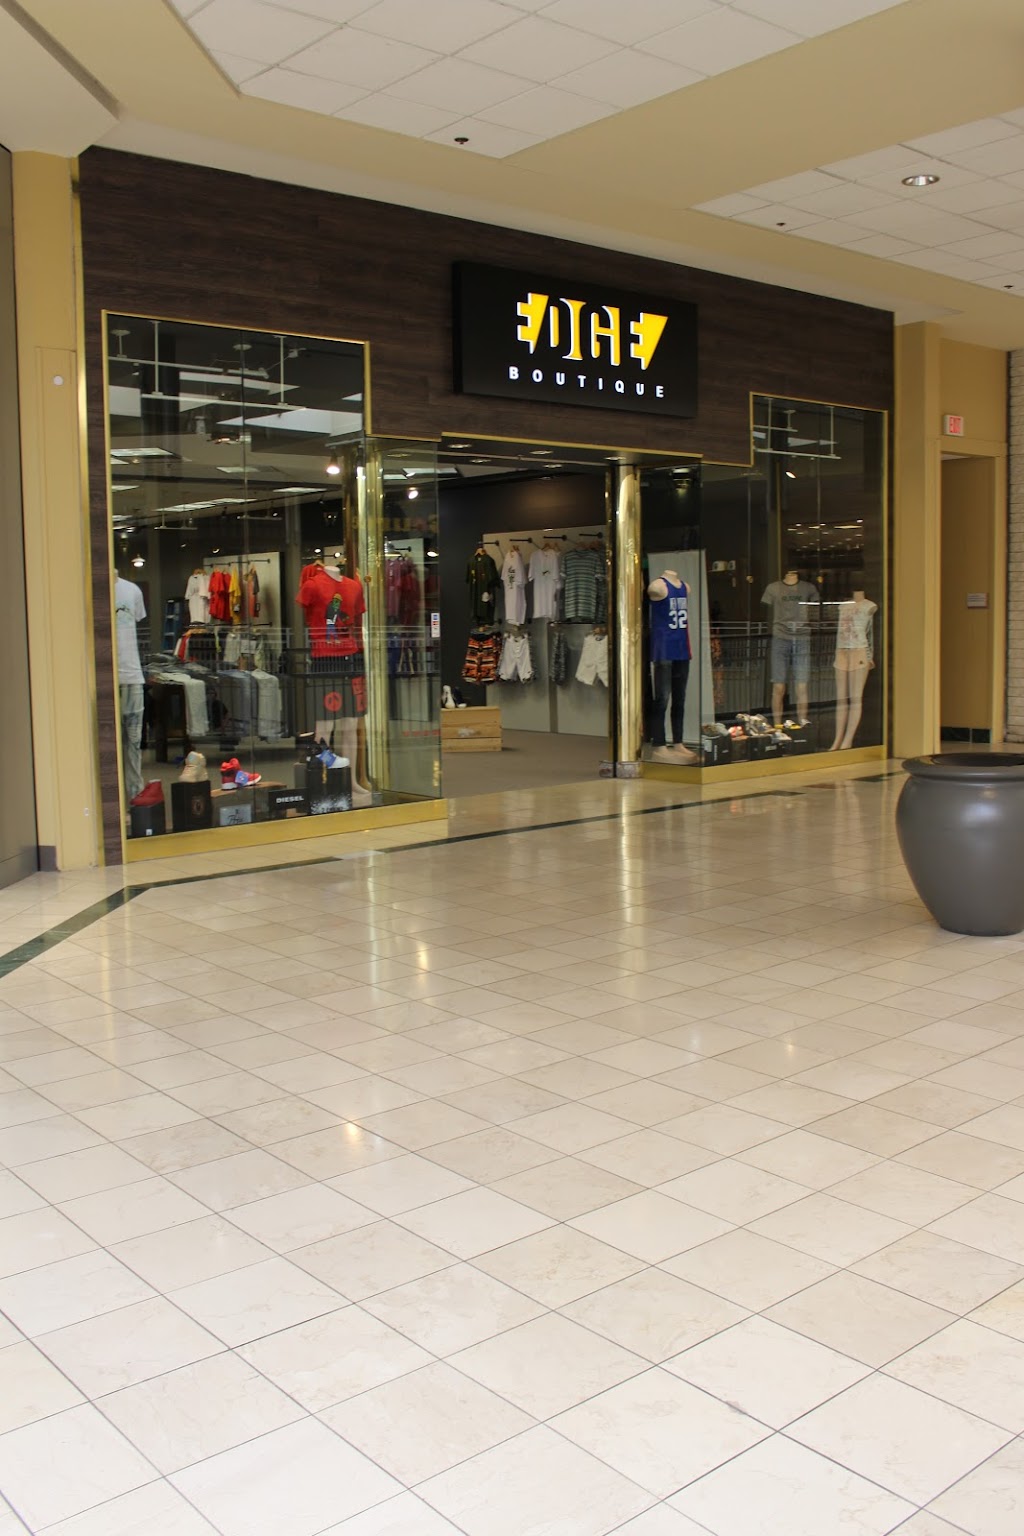 Edge Boutique Lehigh Valley Mall | 251 Lehigh Valley Mall, Whitehall, PA 18052 | Phone: (215) 856-3099